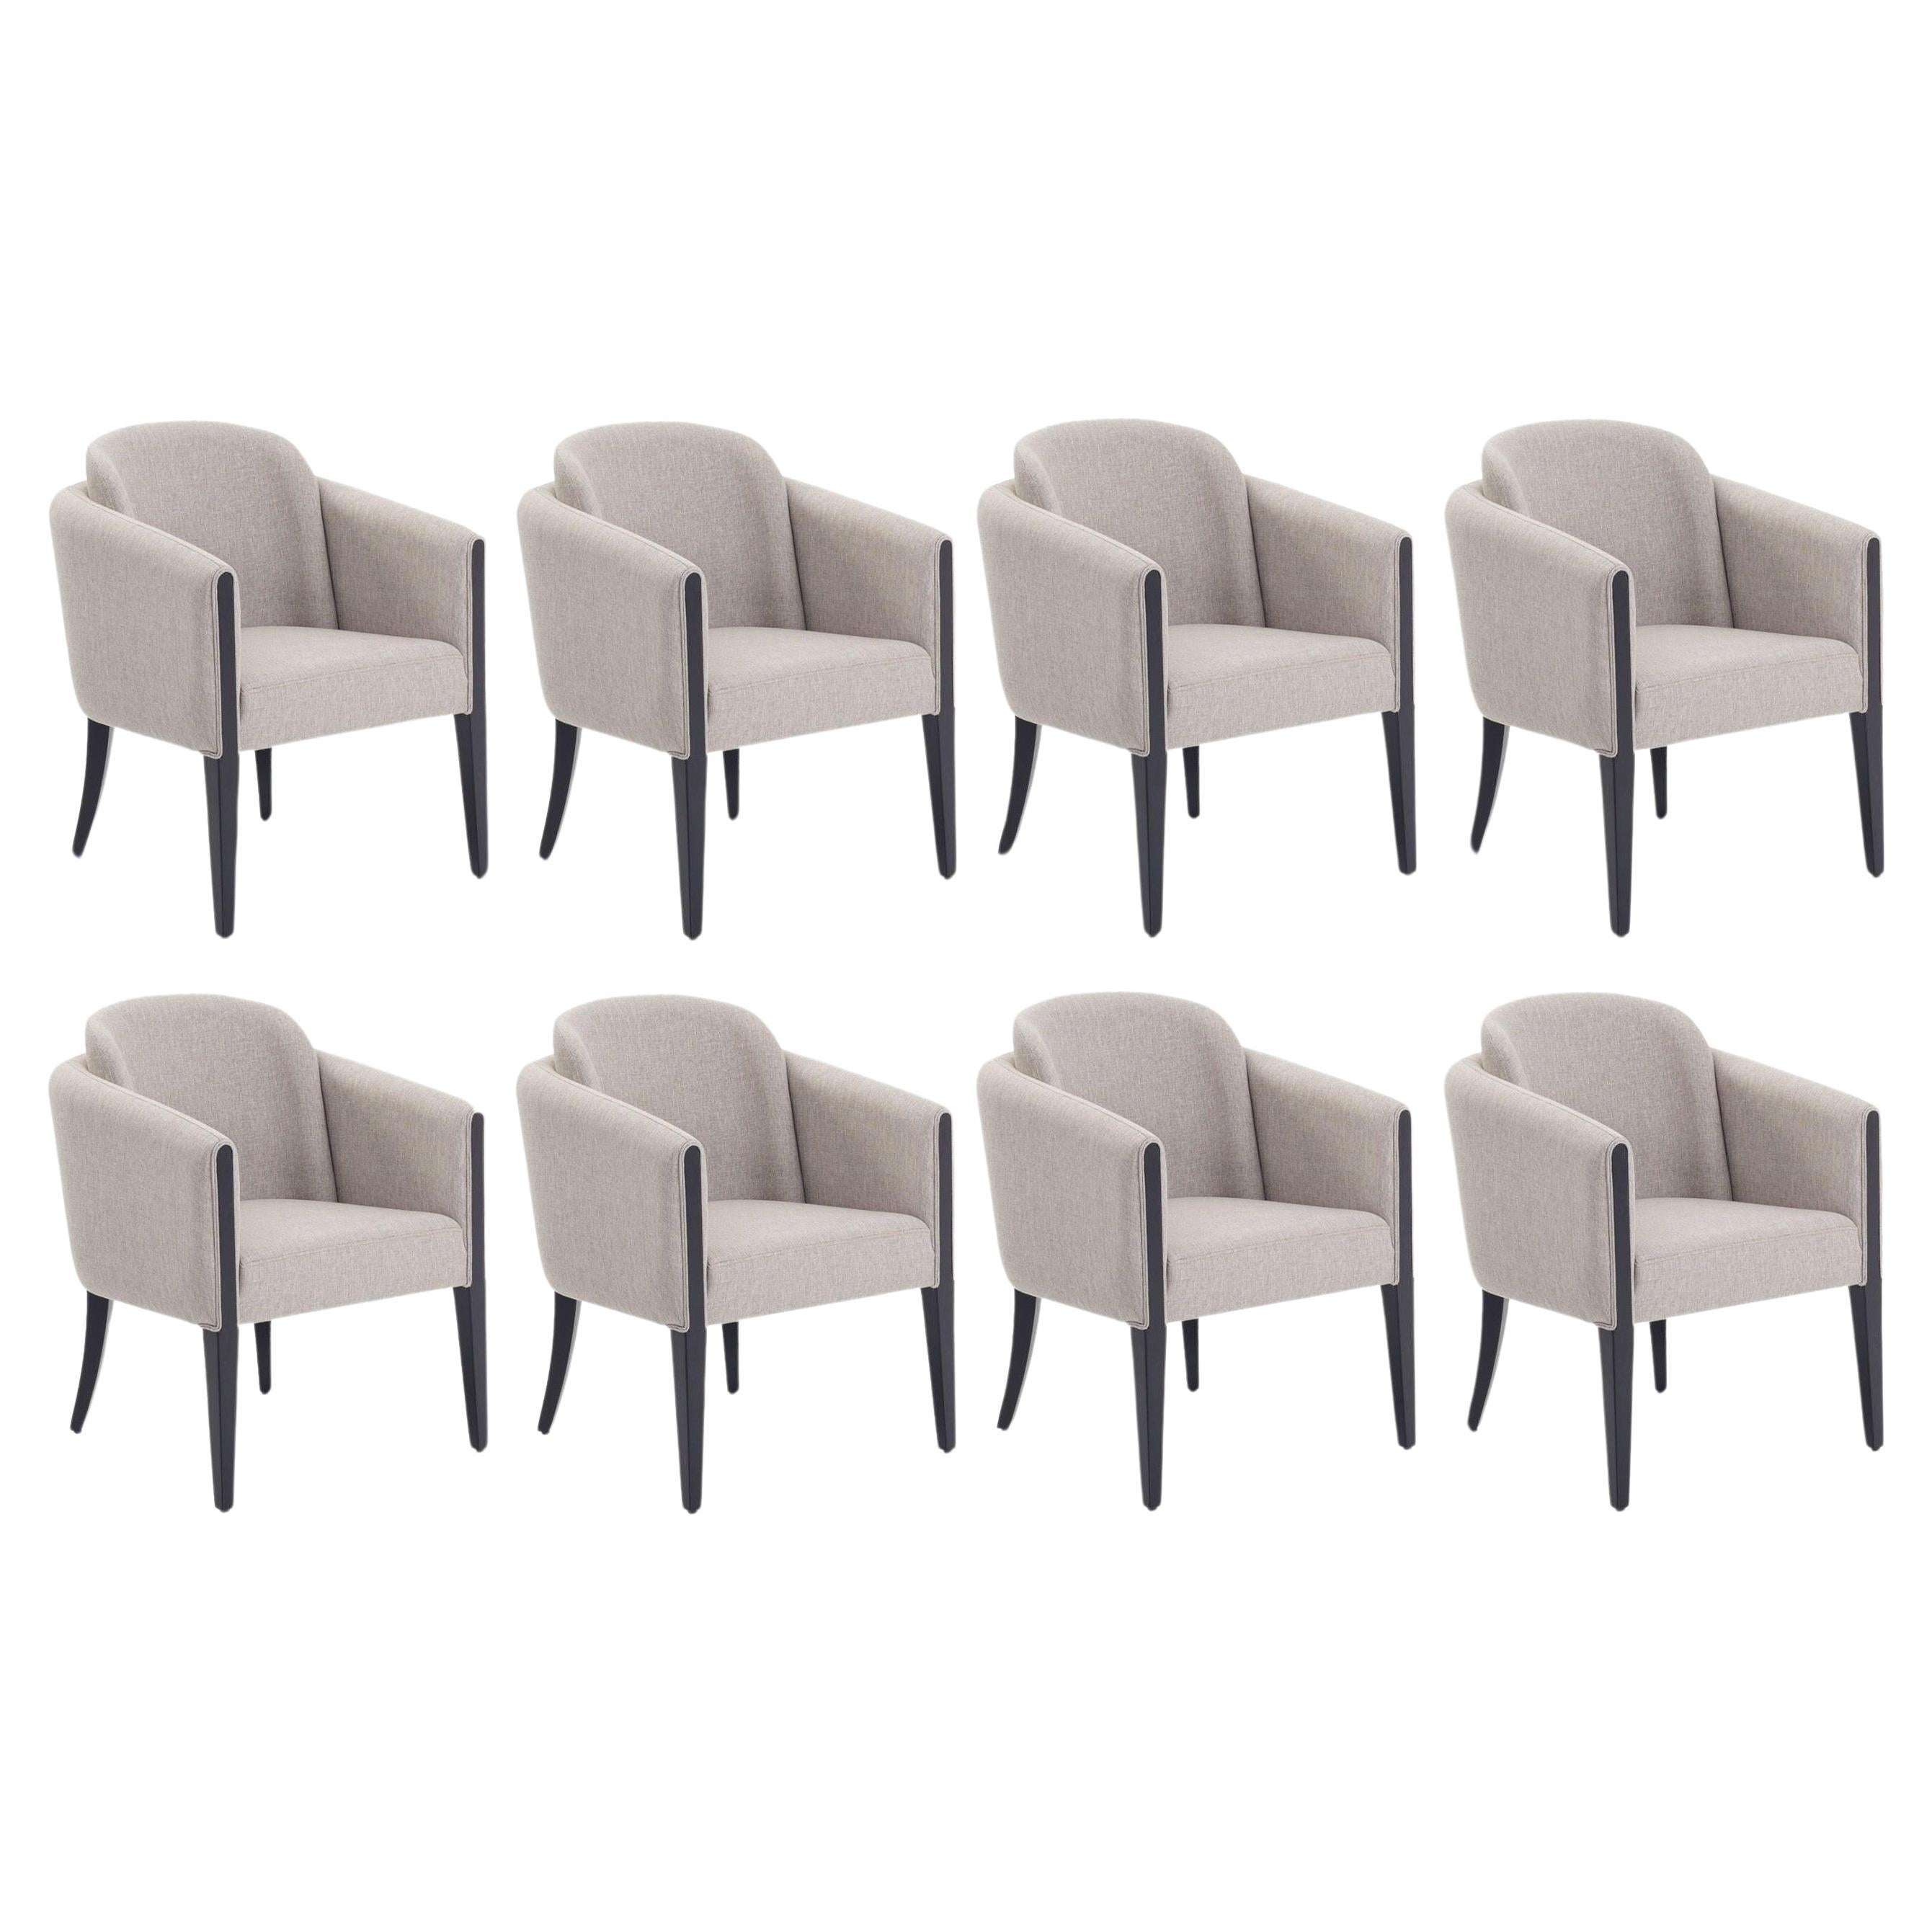 Classic Style Dining Chairs In Performance Greige Fabric 